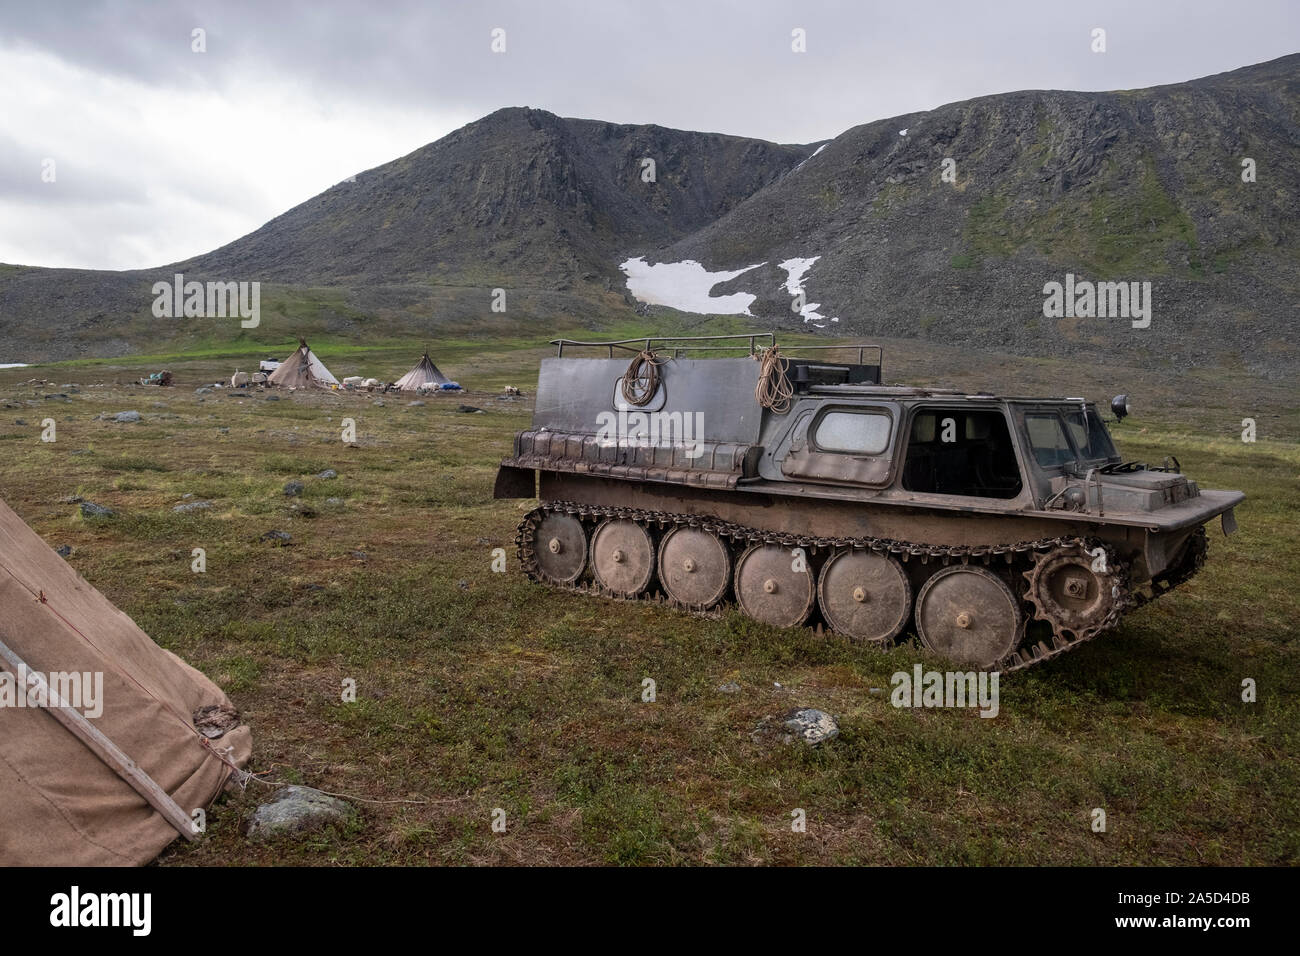 A Gazushka is parked in a Nenets camp on the tundra, Siberia, Russia Stock Photo